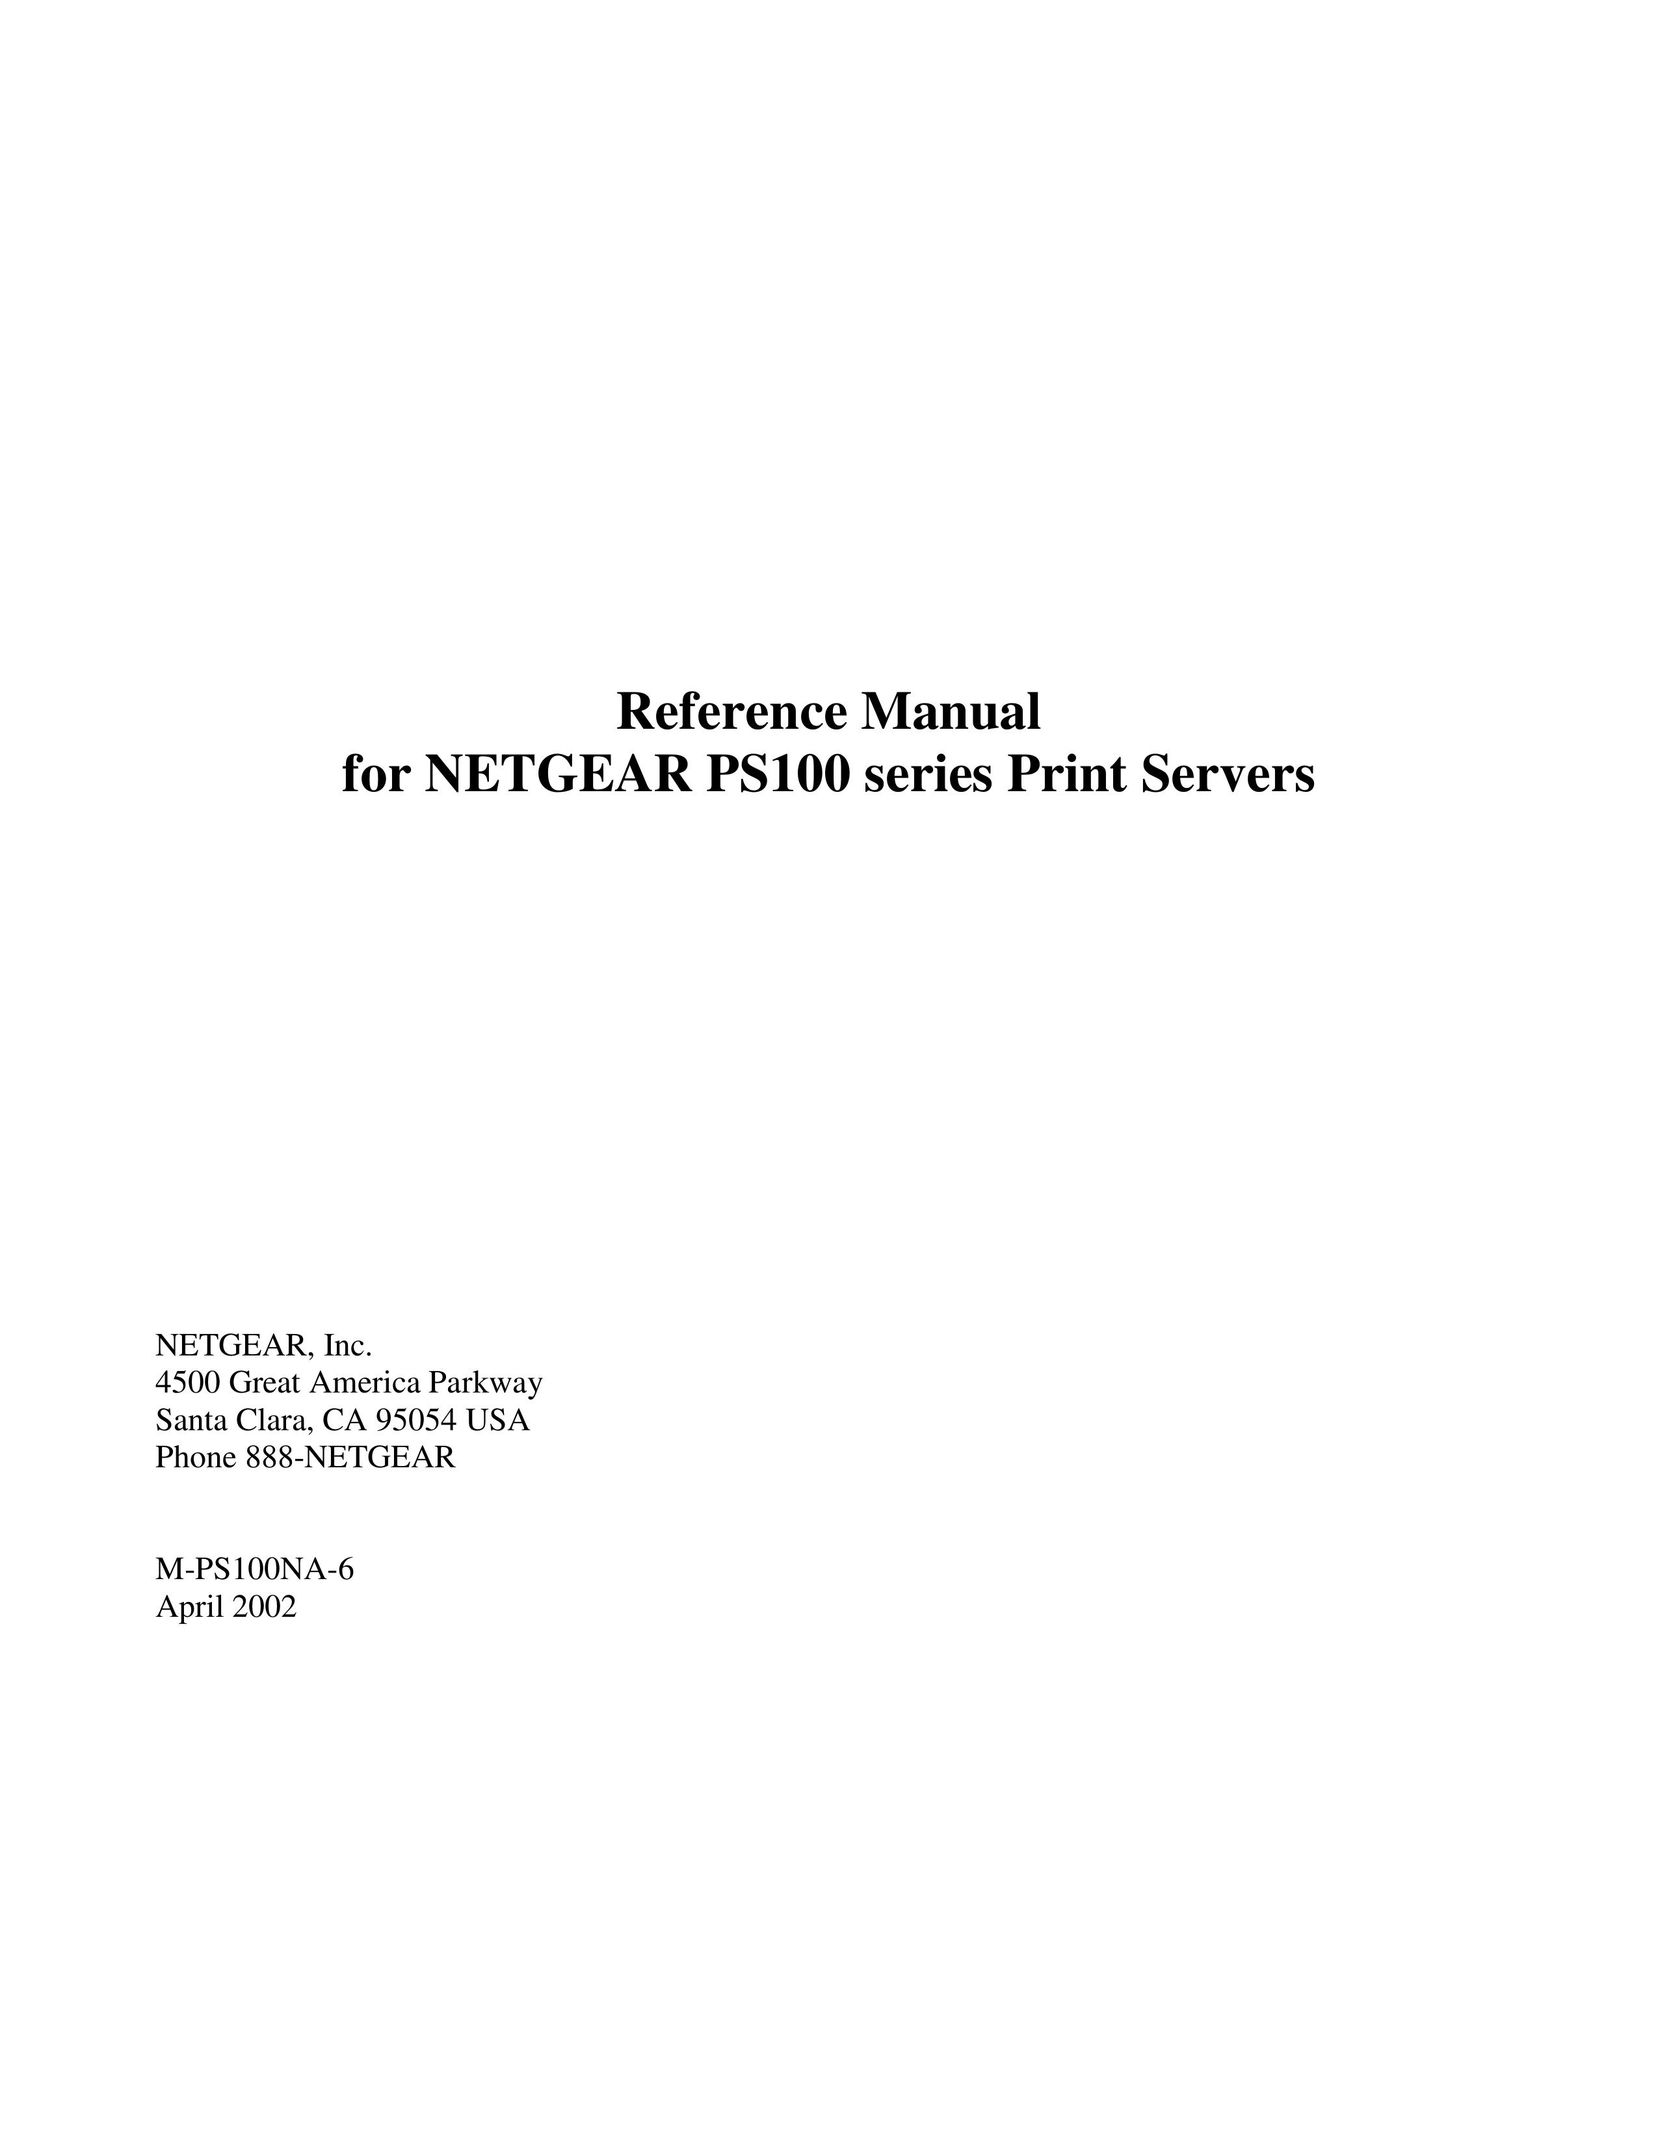 NETGEAR PS100 All in One Printer User Manual